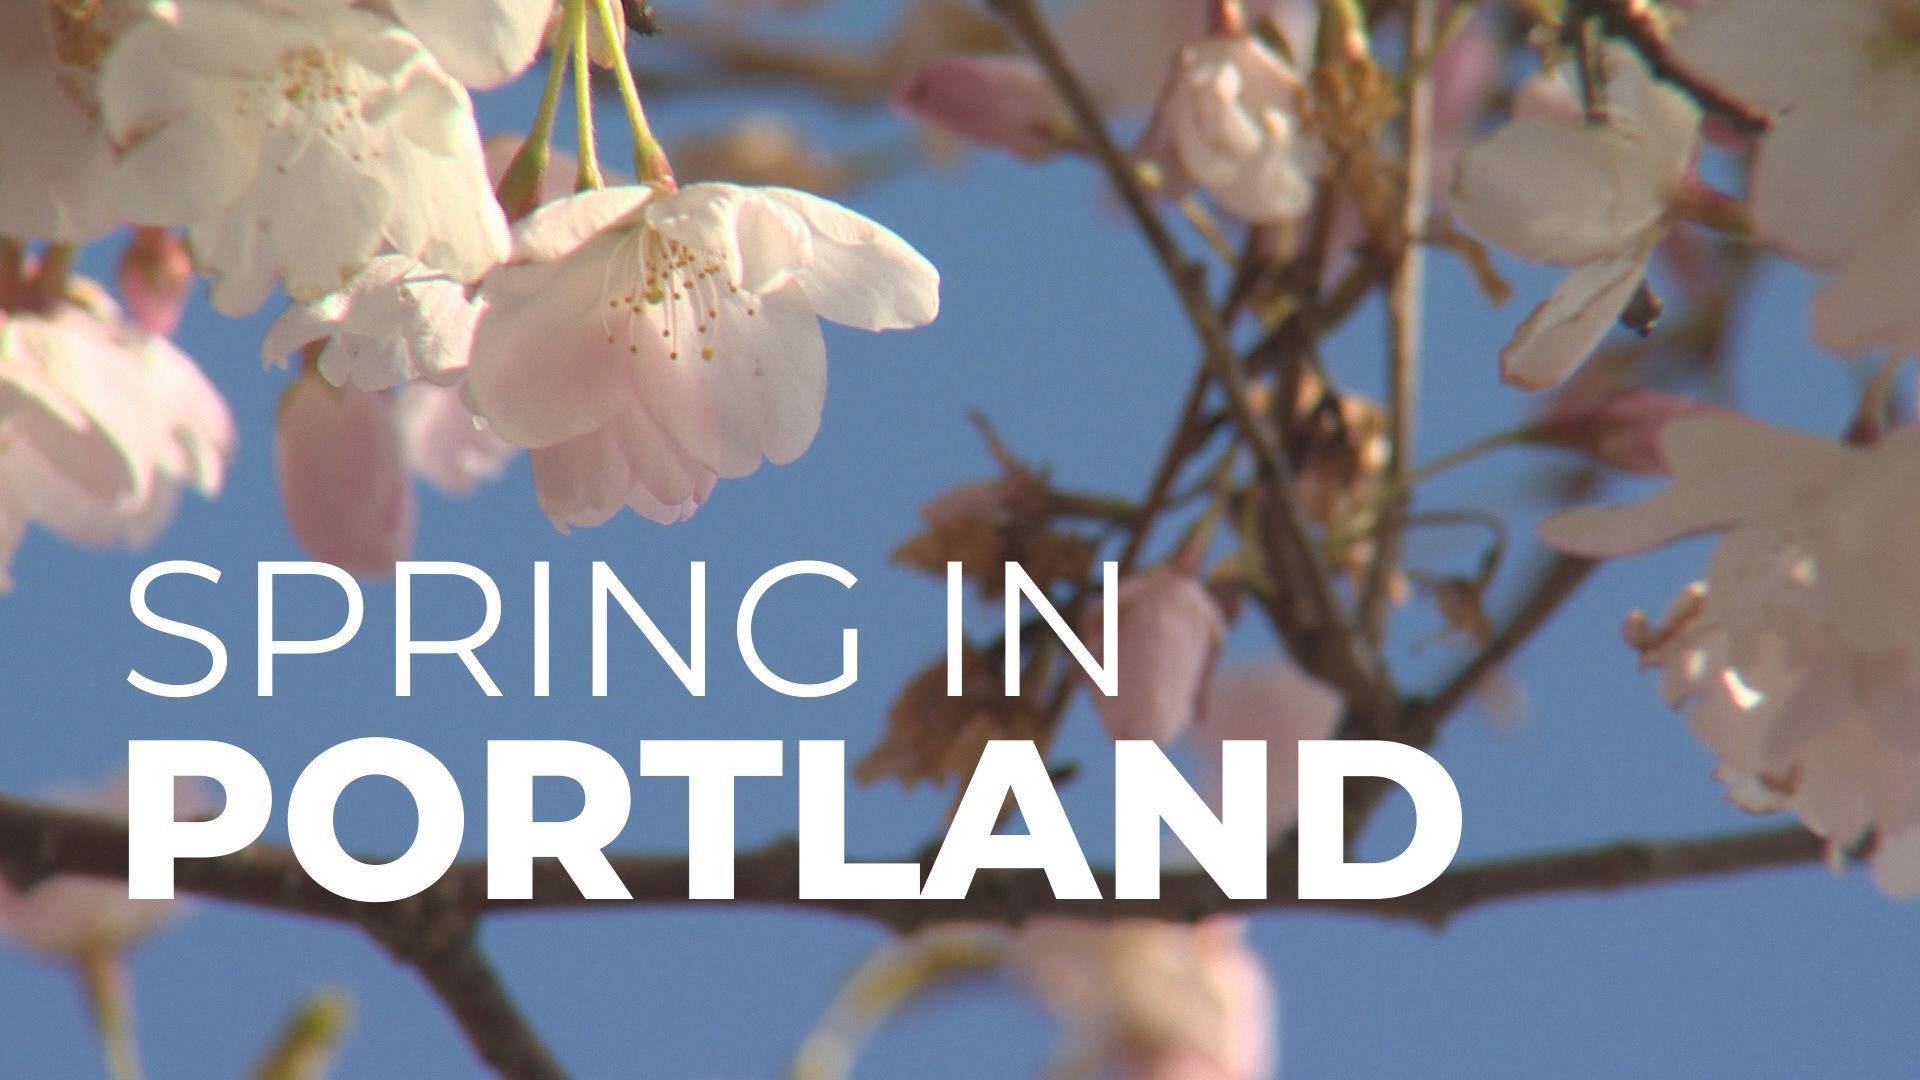 It's officially spring in Portland so photographer Chad Dehart went down to Tom McCall Waterfront Park and captured the cherry blossoms in bloom.